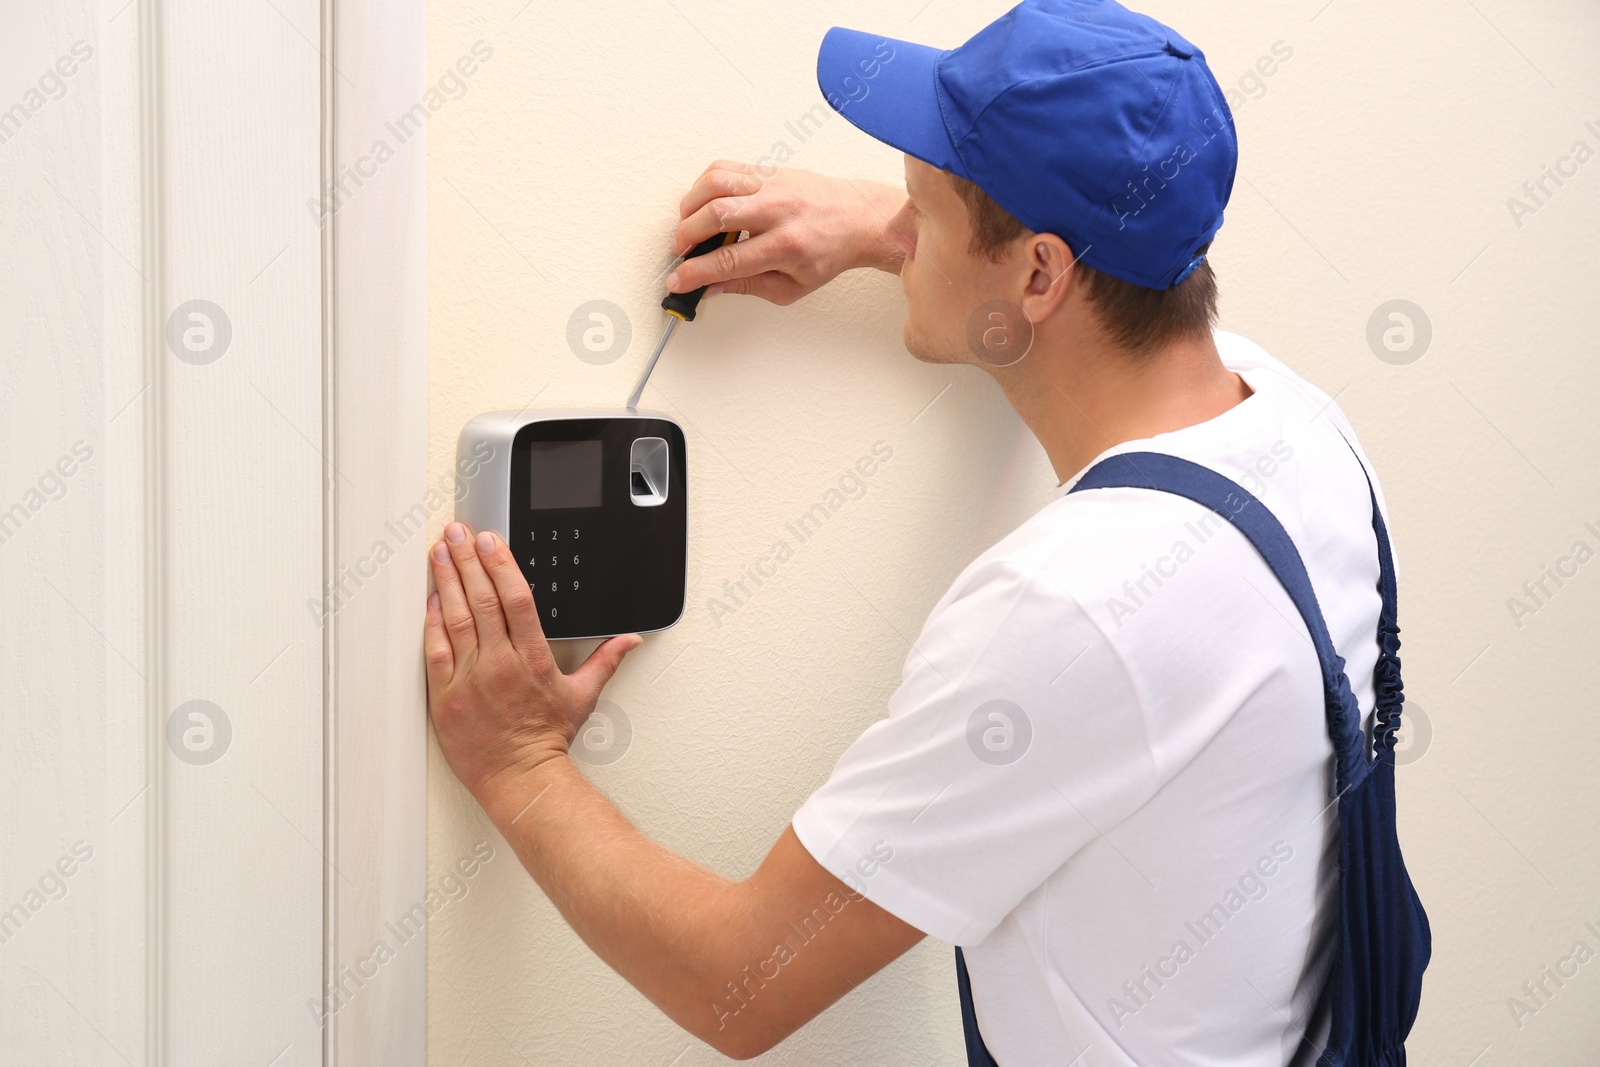 Photo of Male technician installing security alarm system indoors